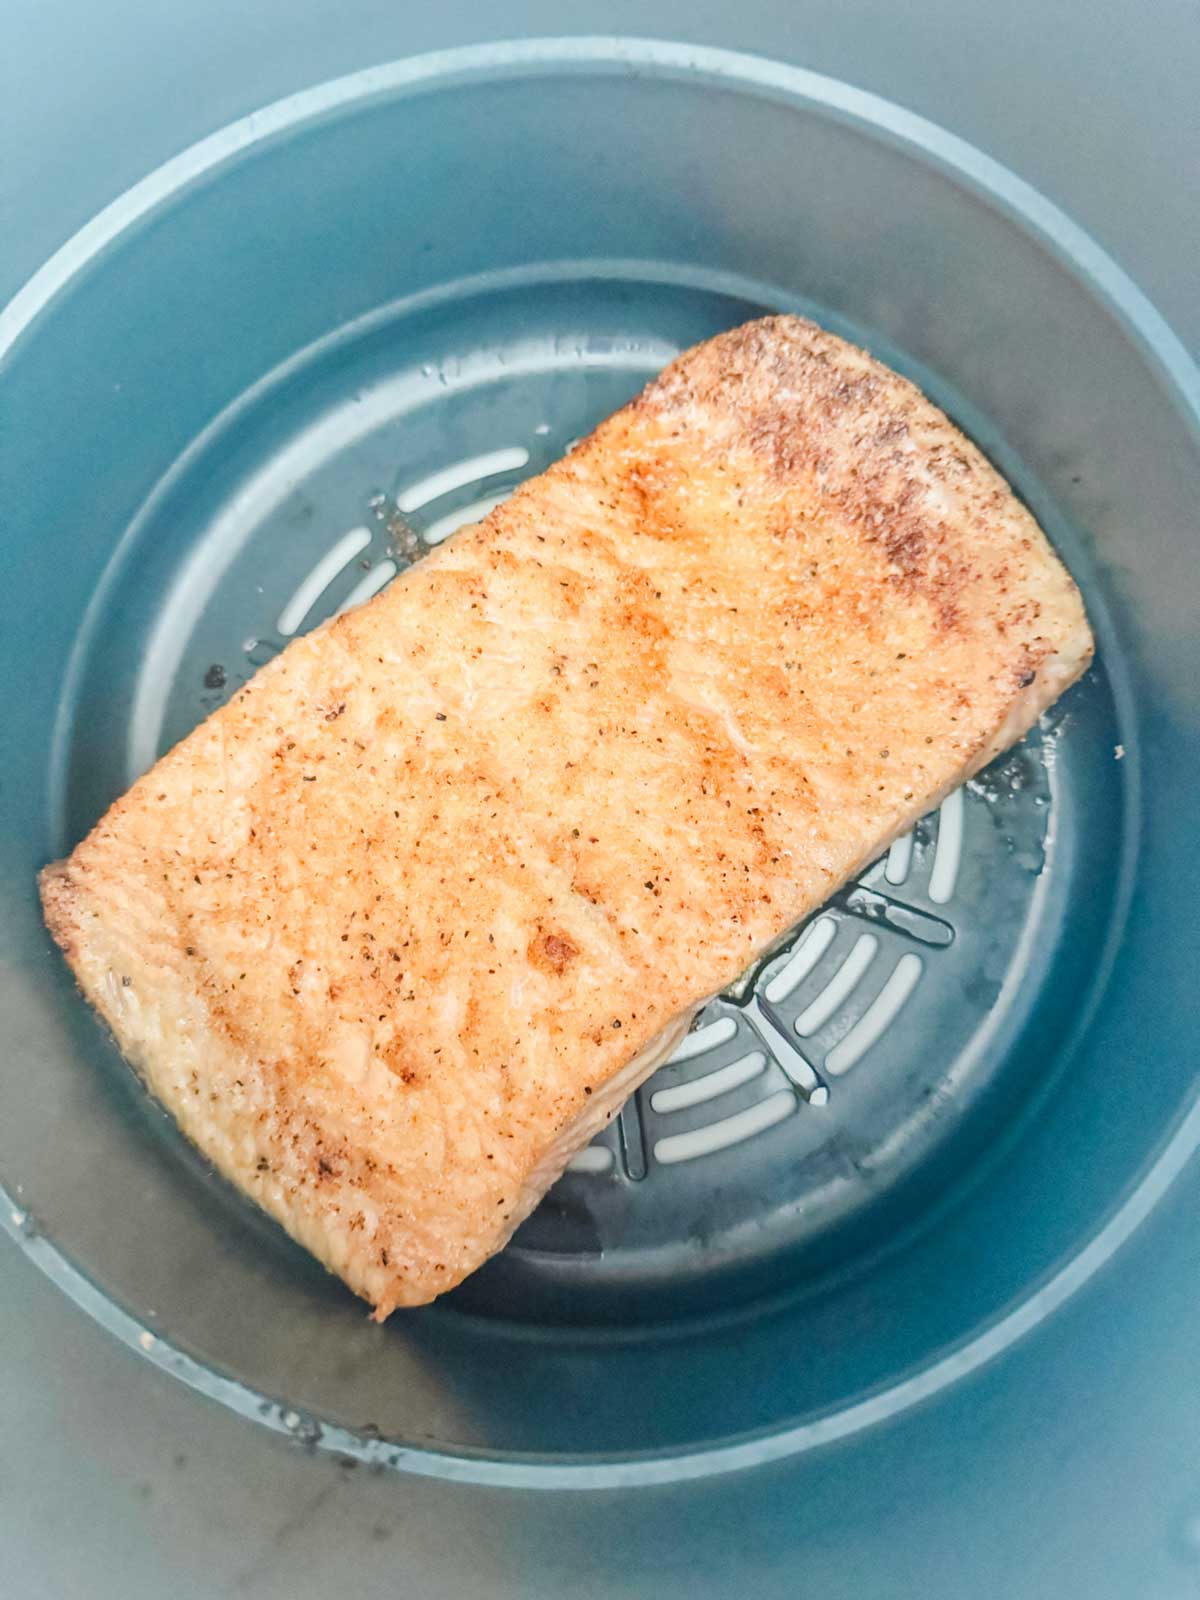 Salmon that has been almost all the way cooked in a Ninja Foodi air fryer basket.